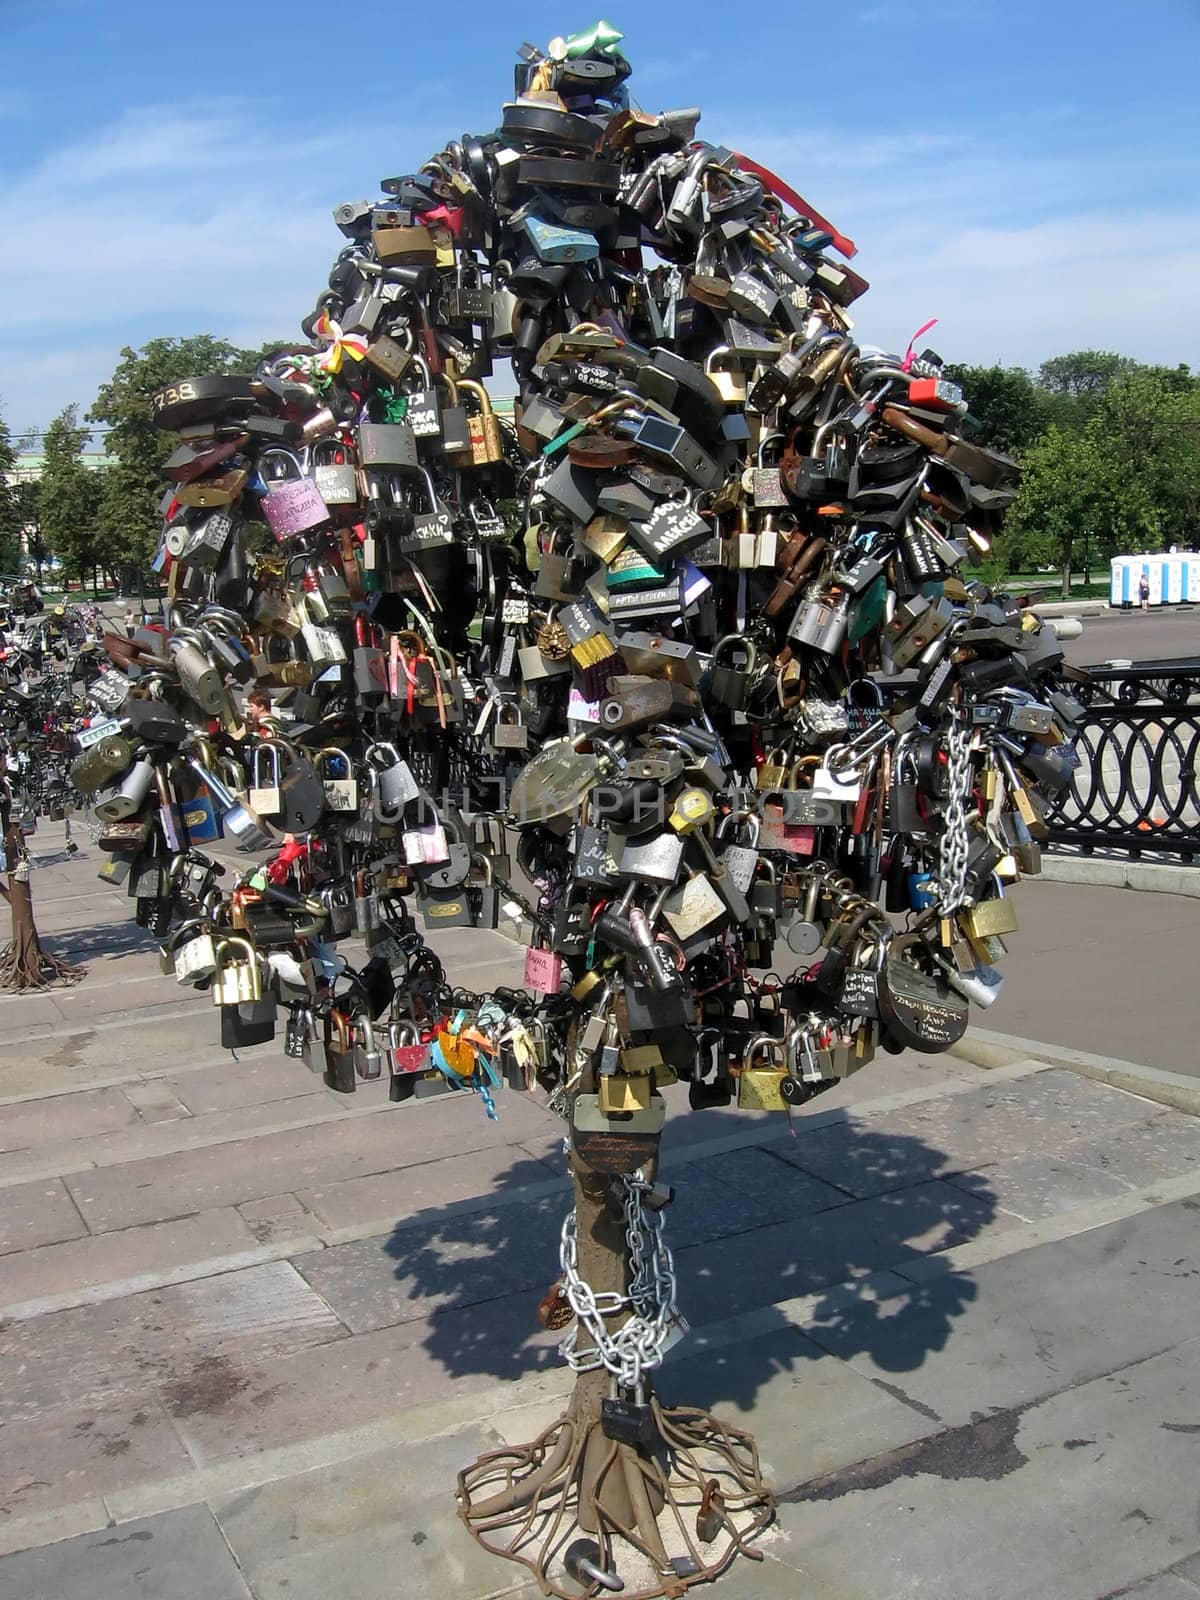 Set of various love lock keys like a tree in Moscow, photo was made 2008-08-21